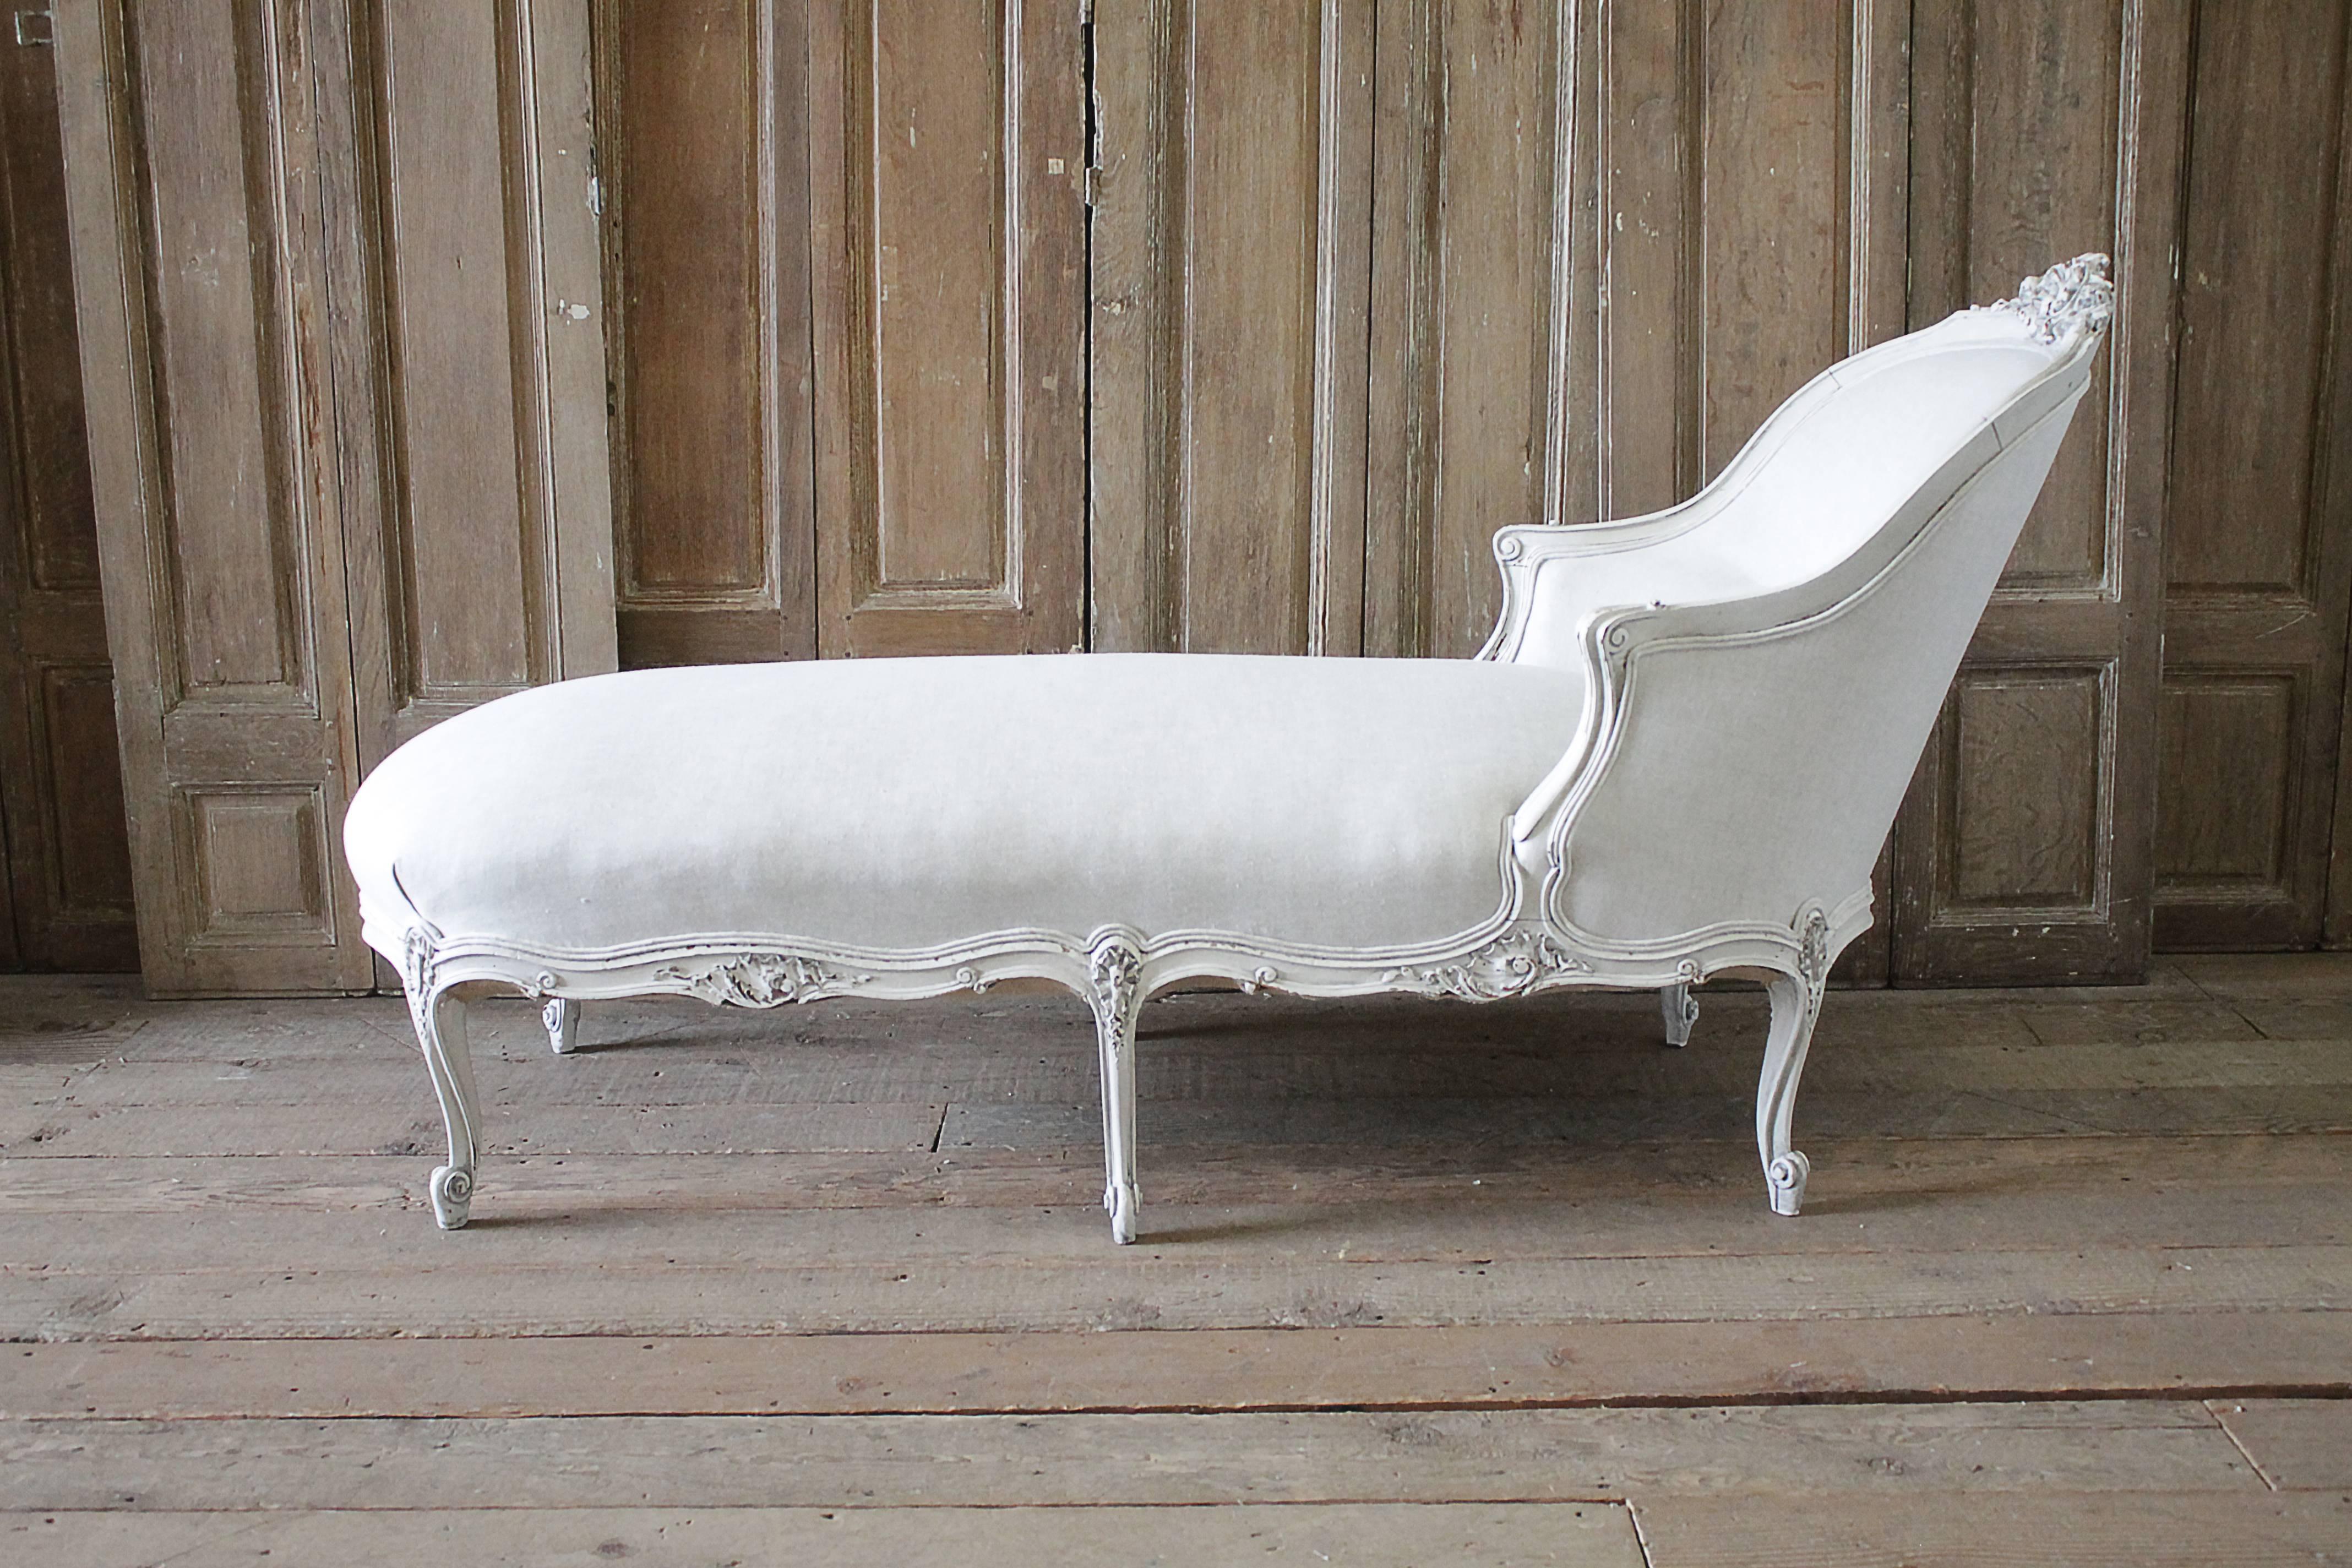 Pretty painted chaise longue painted in a light oyster white with subtle distressed edges, and antique glazed patina. We reupholstered this recamier in in an oatmeal Belgian linen, finished in a double welt trim.
Large Rococo shell carving with